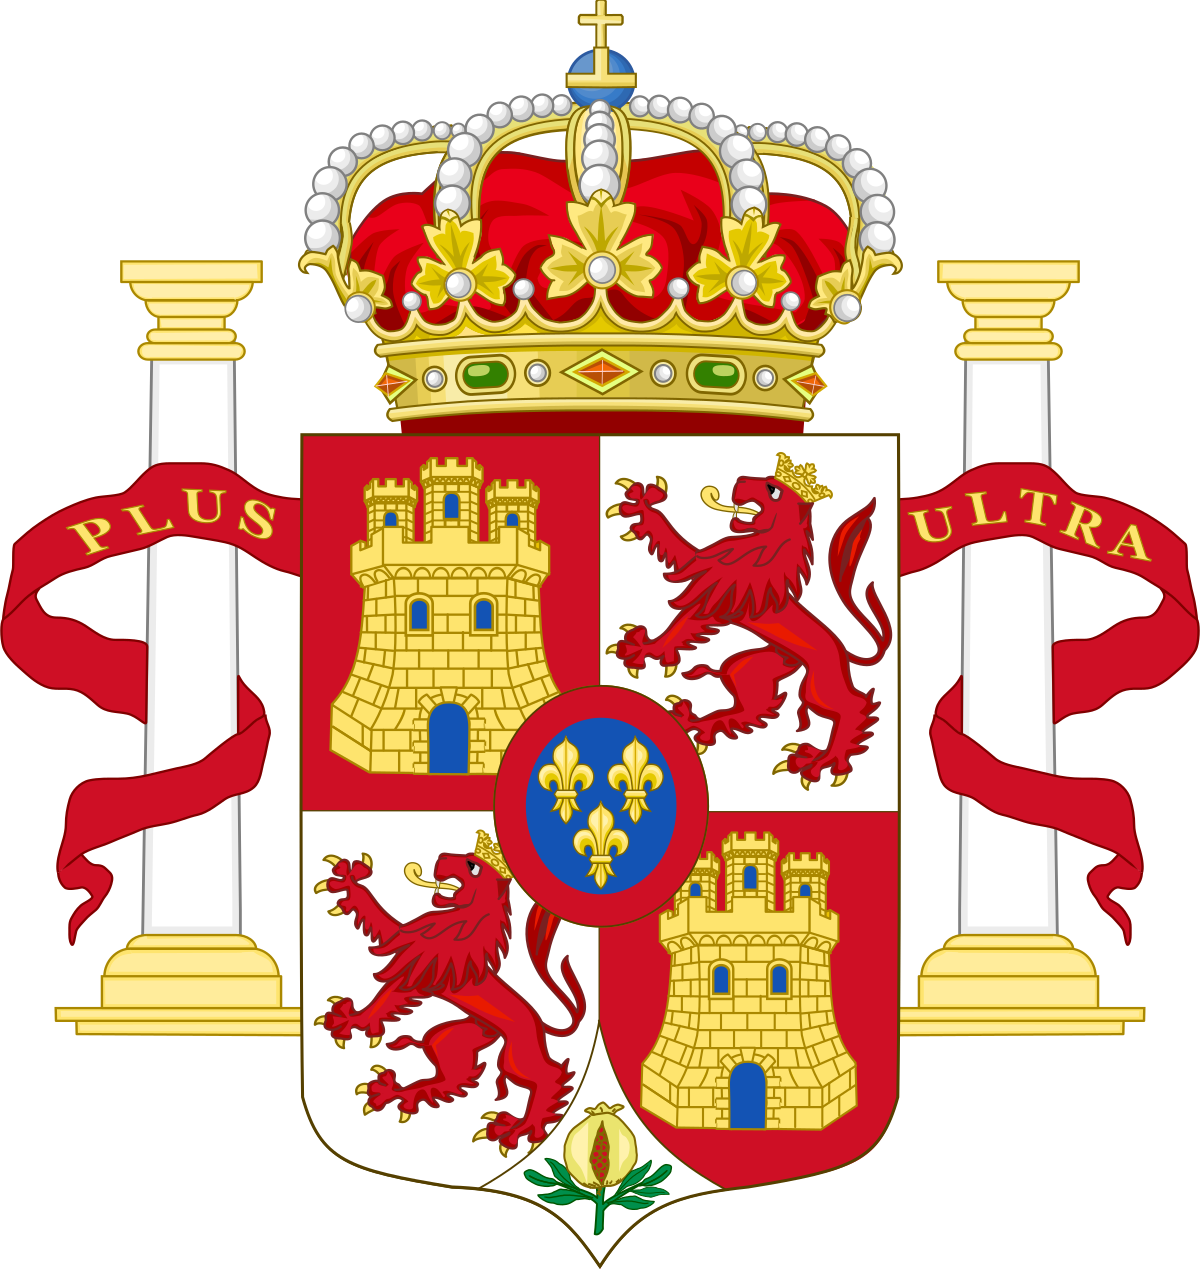 lesser-royal-coat-of-arms-of-spain-1700-1868-and-1834-1930